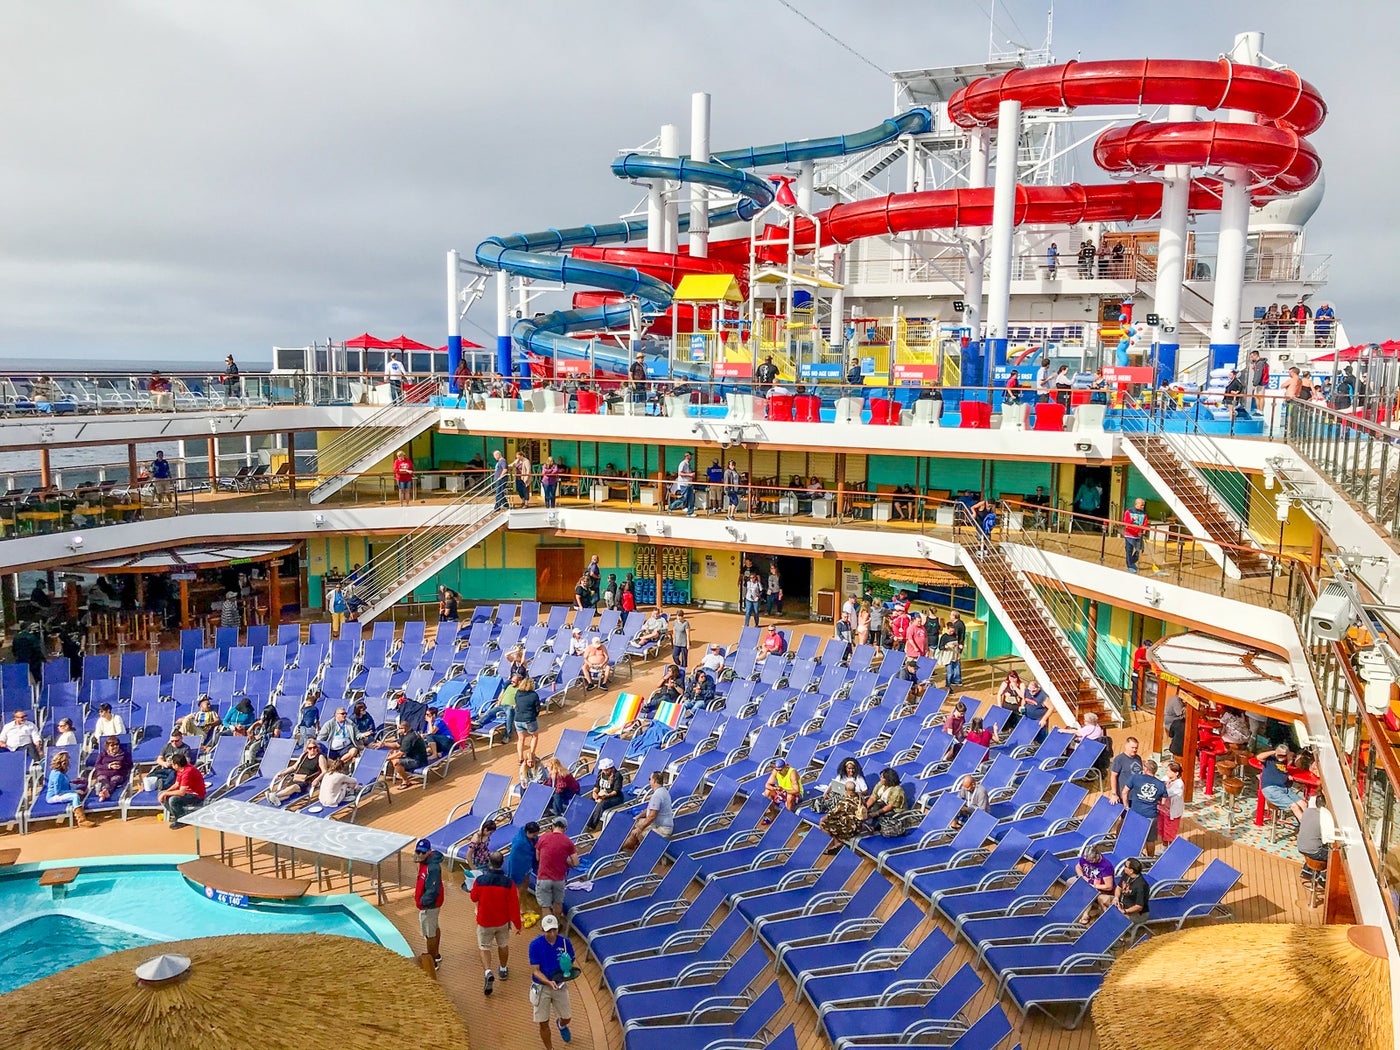 the holiday carnival cruise ship